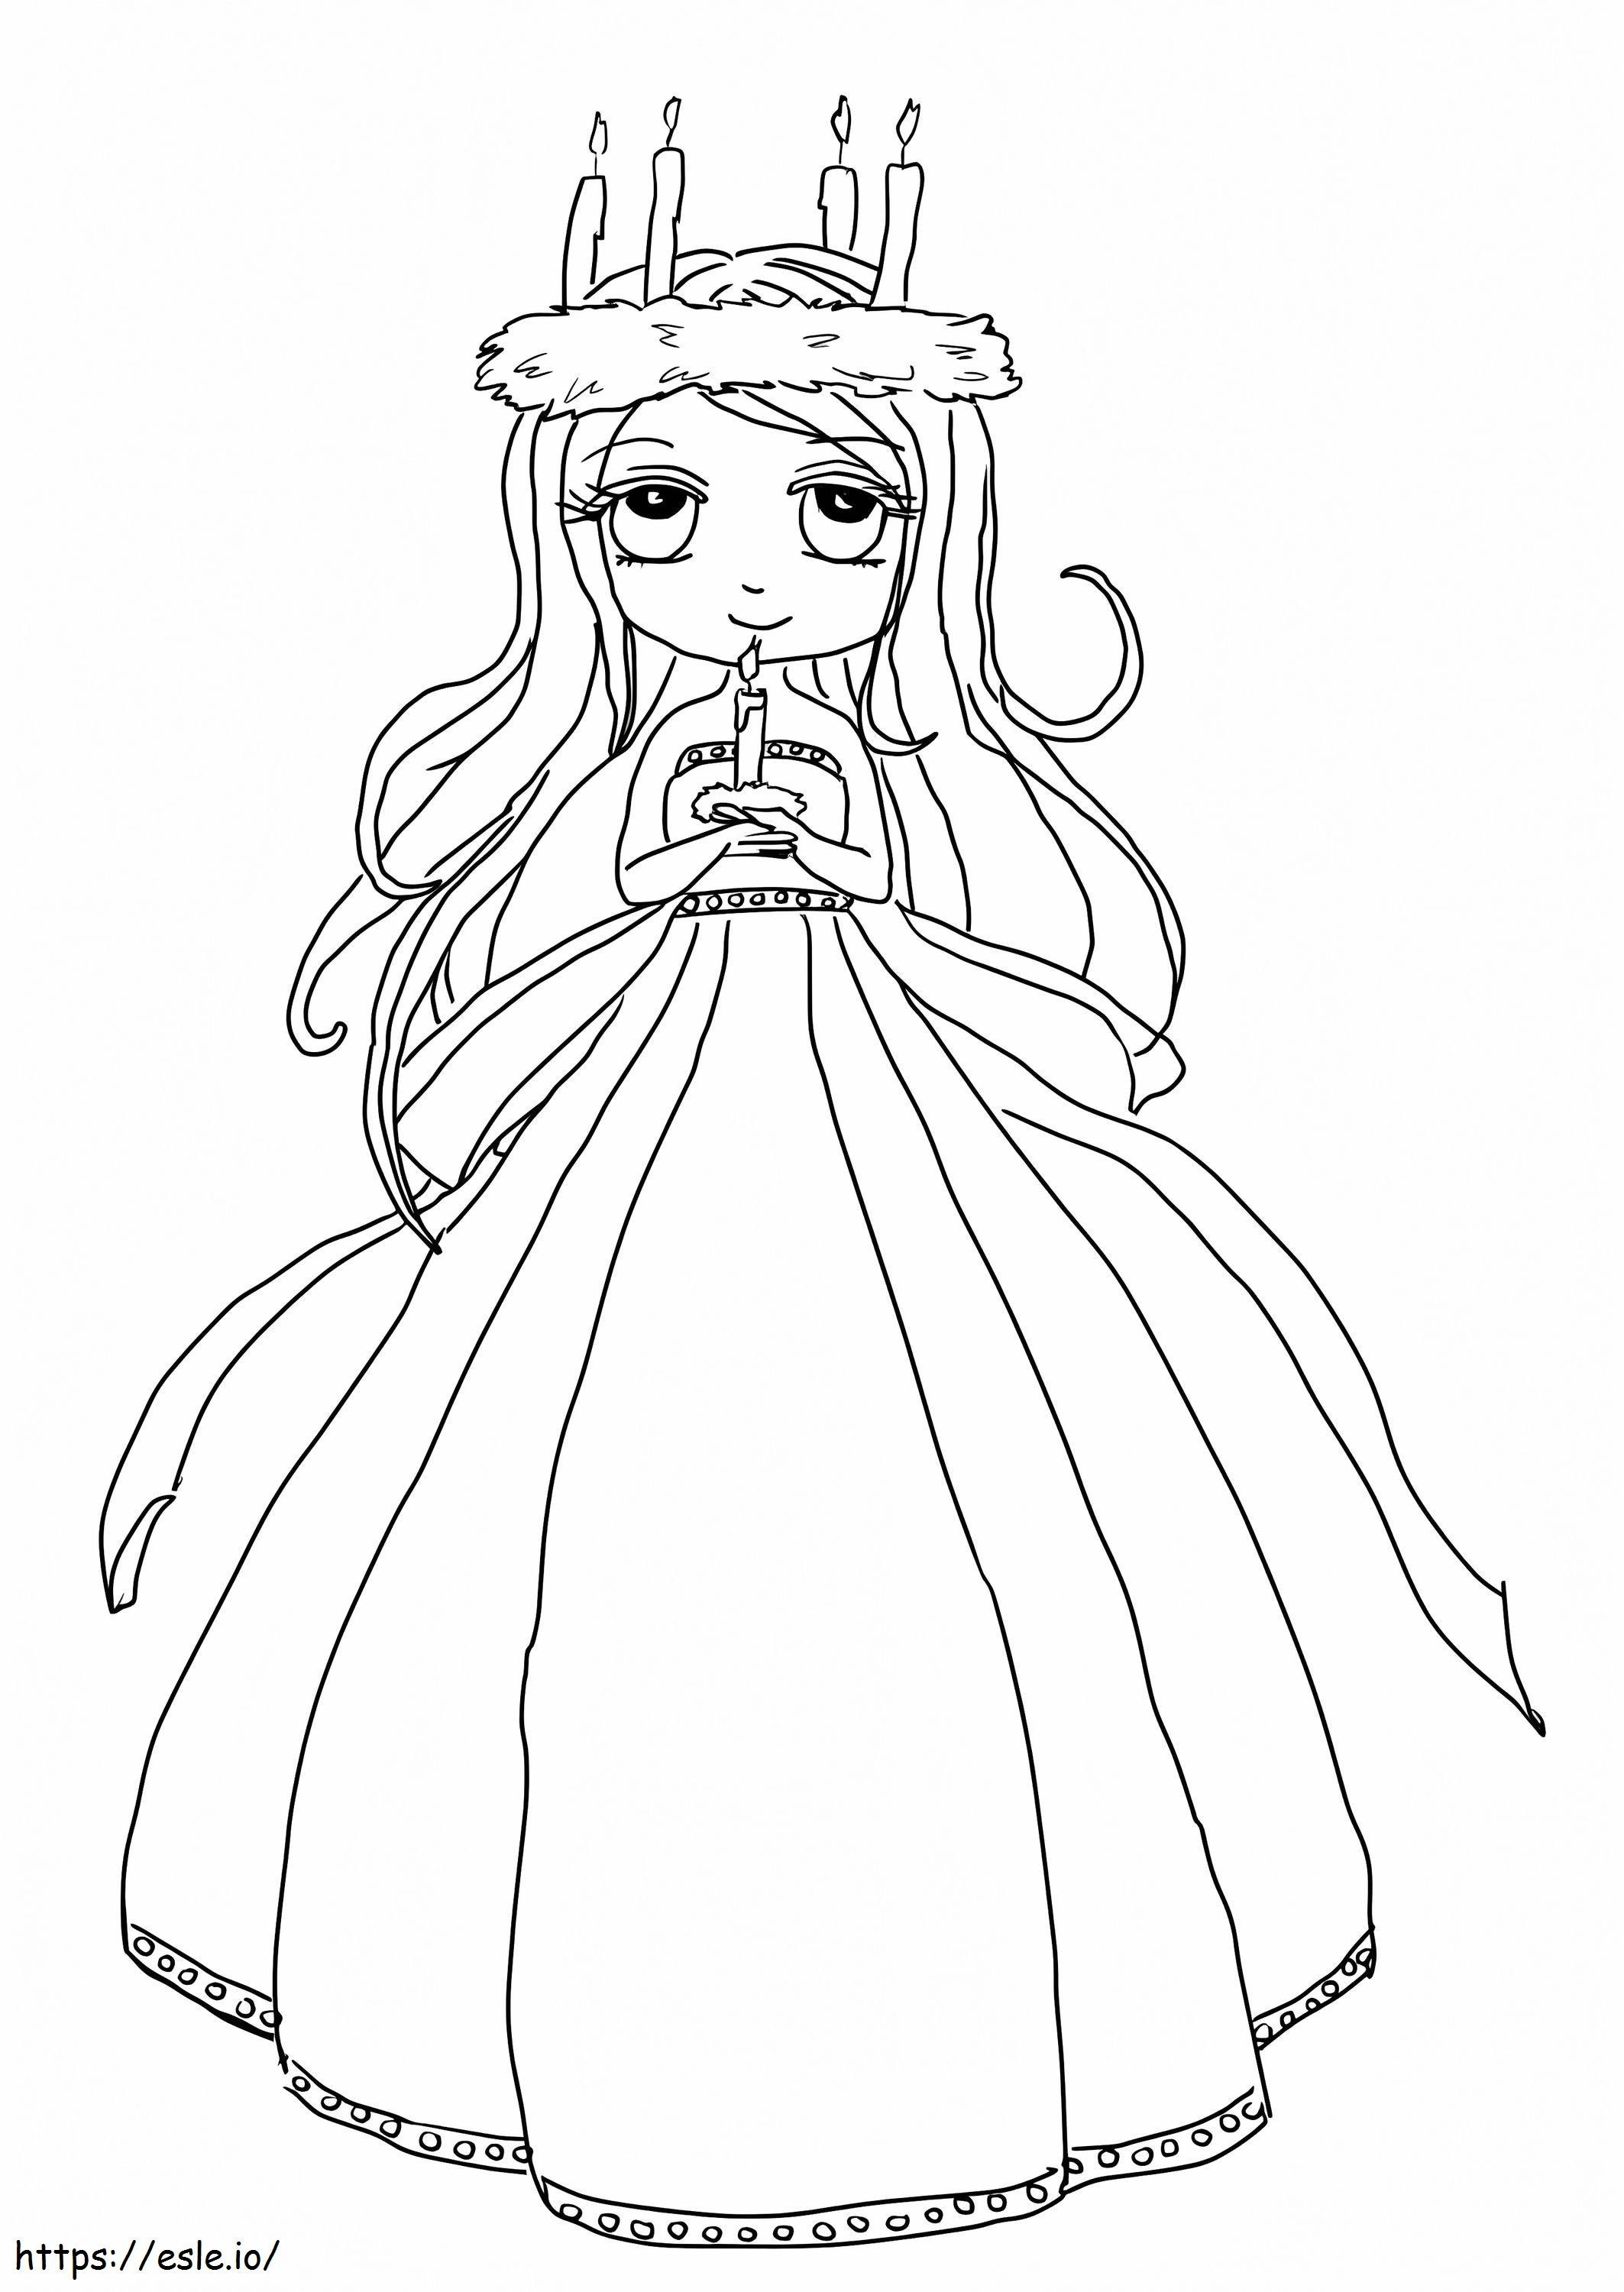 Cute St. Lucia Girl coloring page